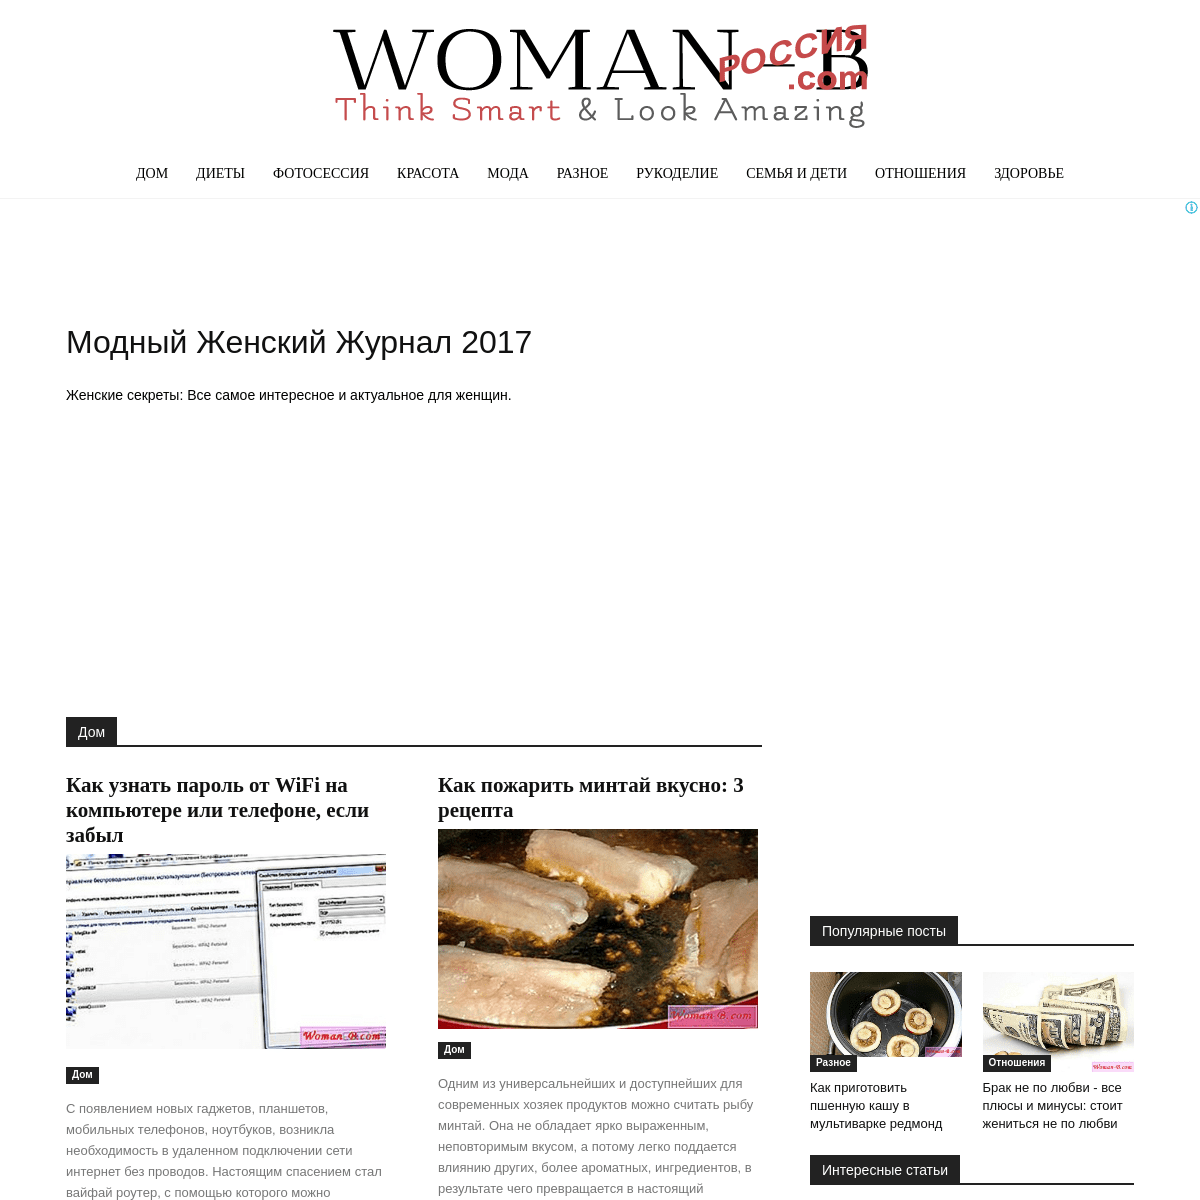 A complete backup of woman-b.com